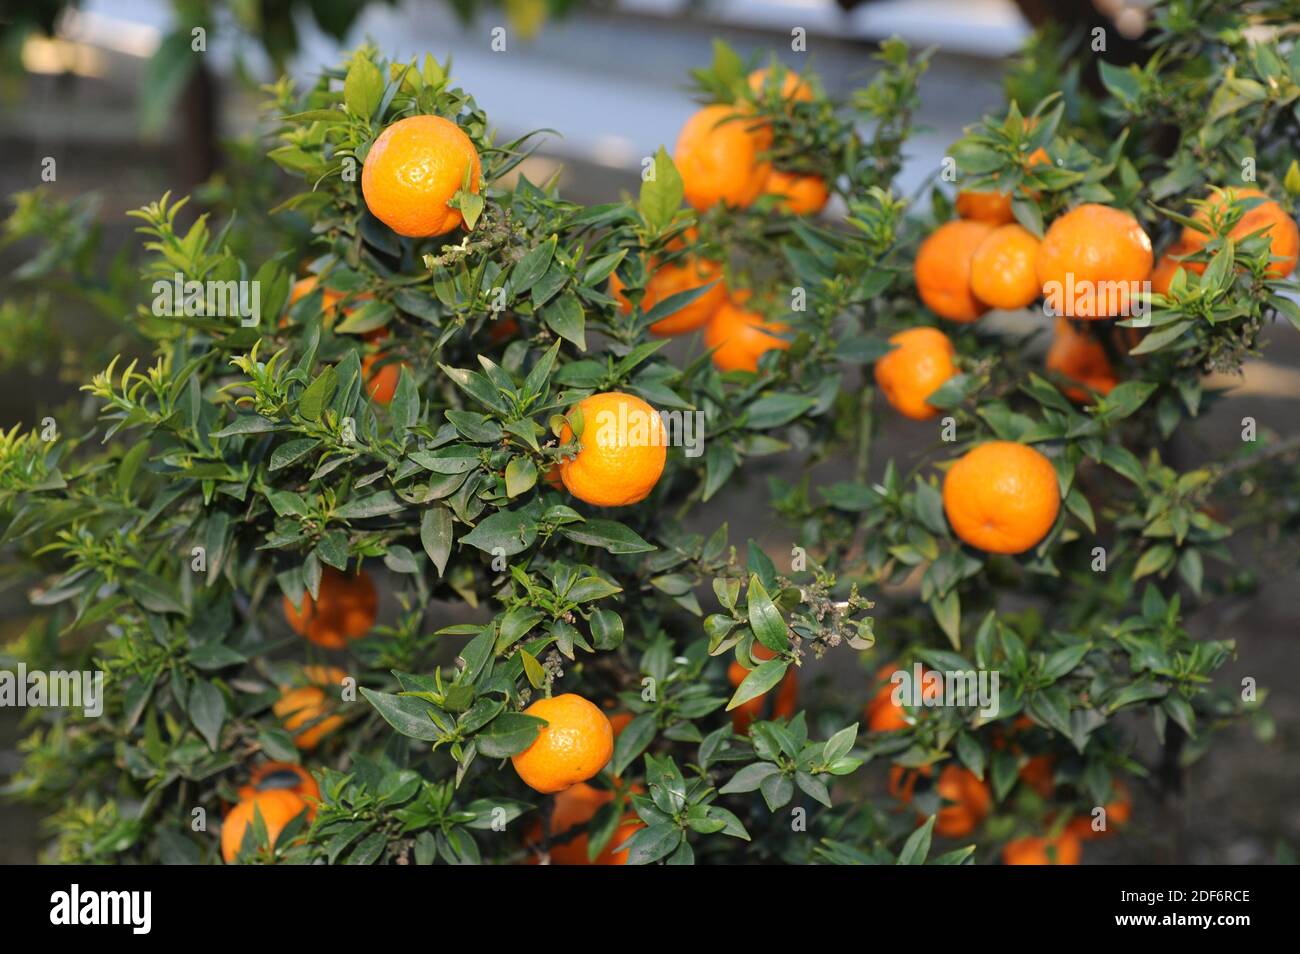 Myrtle-leaved orange tree (Citrus myrtifolia) is a shrub with samall leaves and fruits richs in essential oils. Fruits and leaves detail. Stock Photo